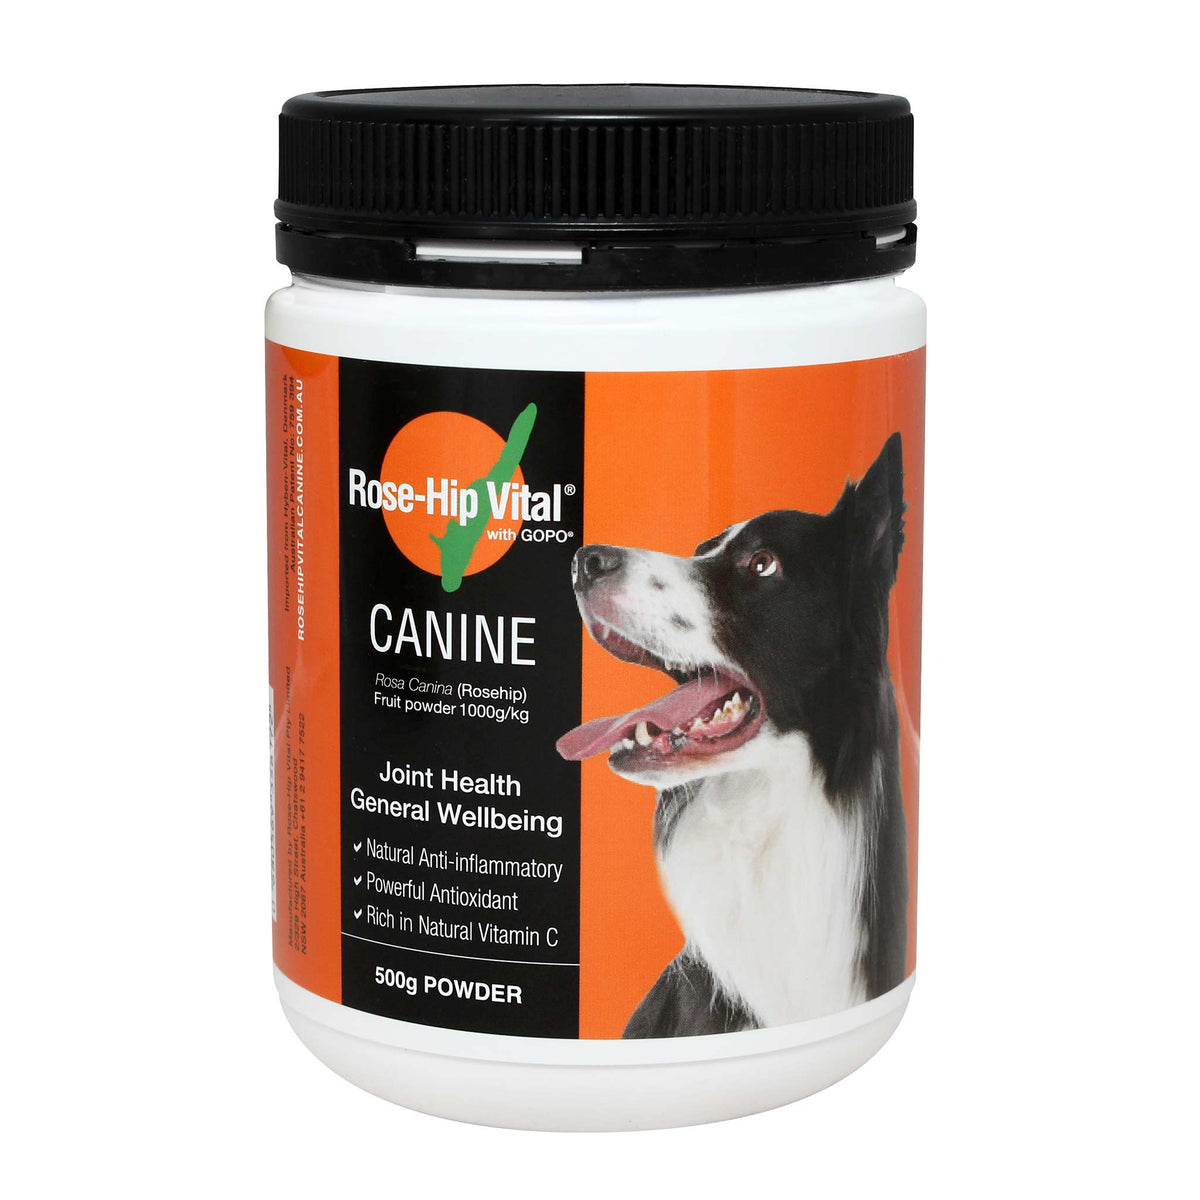 Rose-Hip Vital Canine - Joint Health &amp; General Wellbeing for Dogs